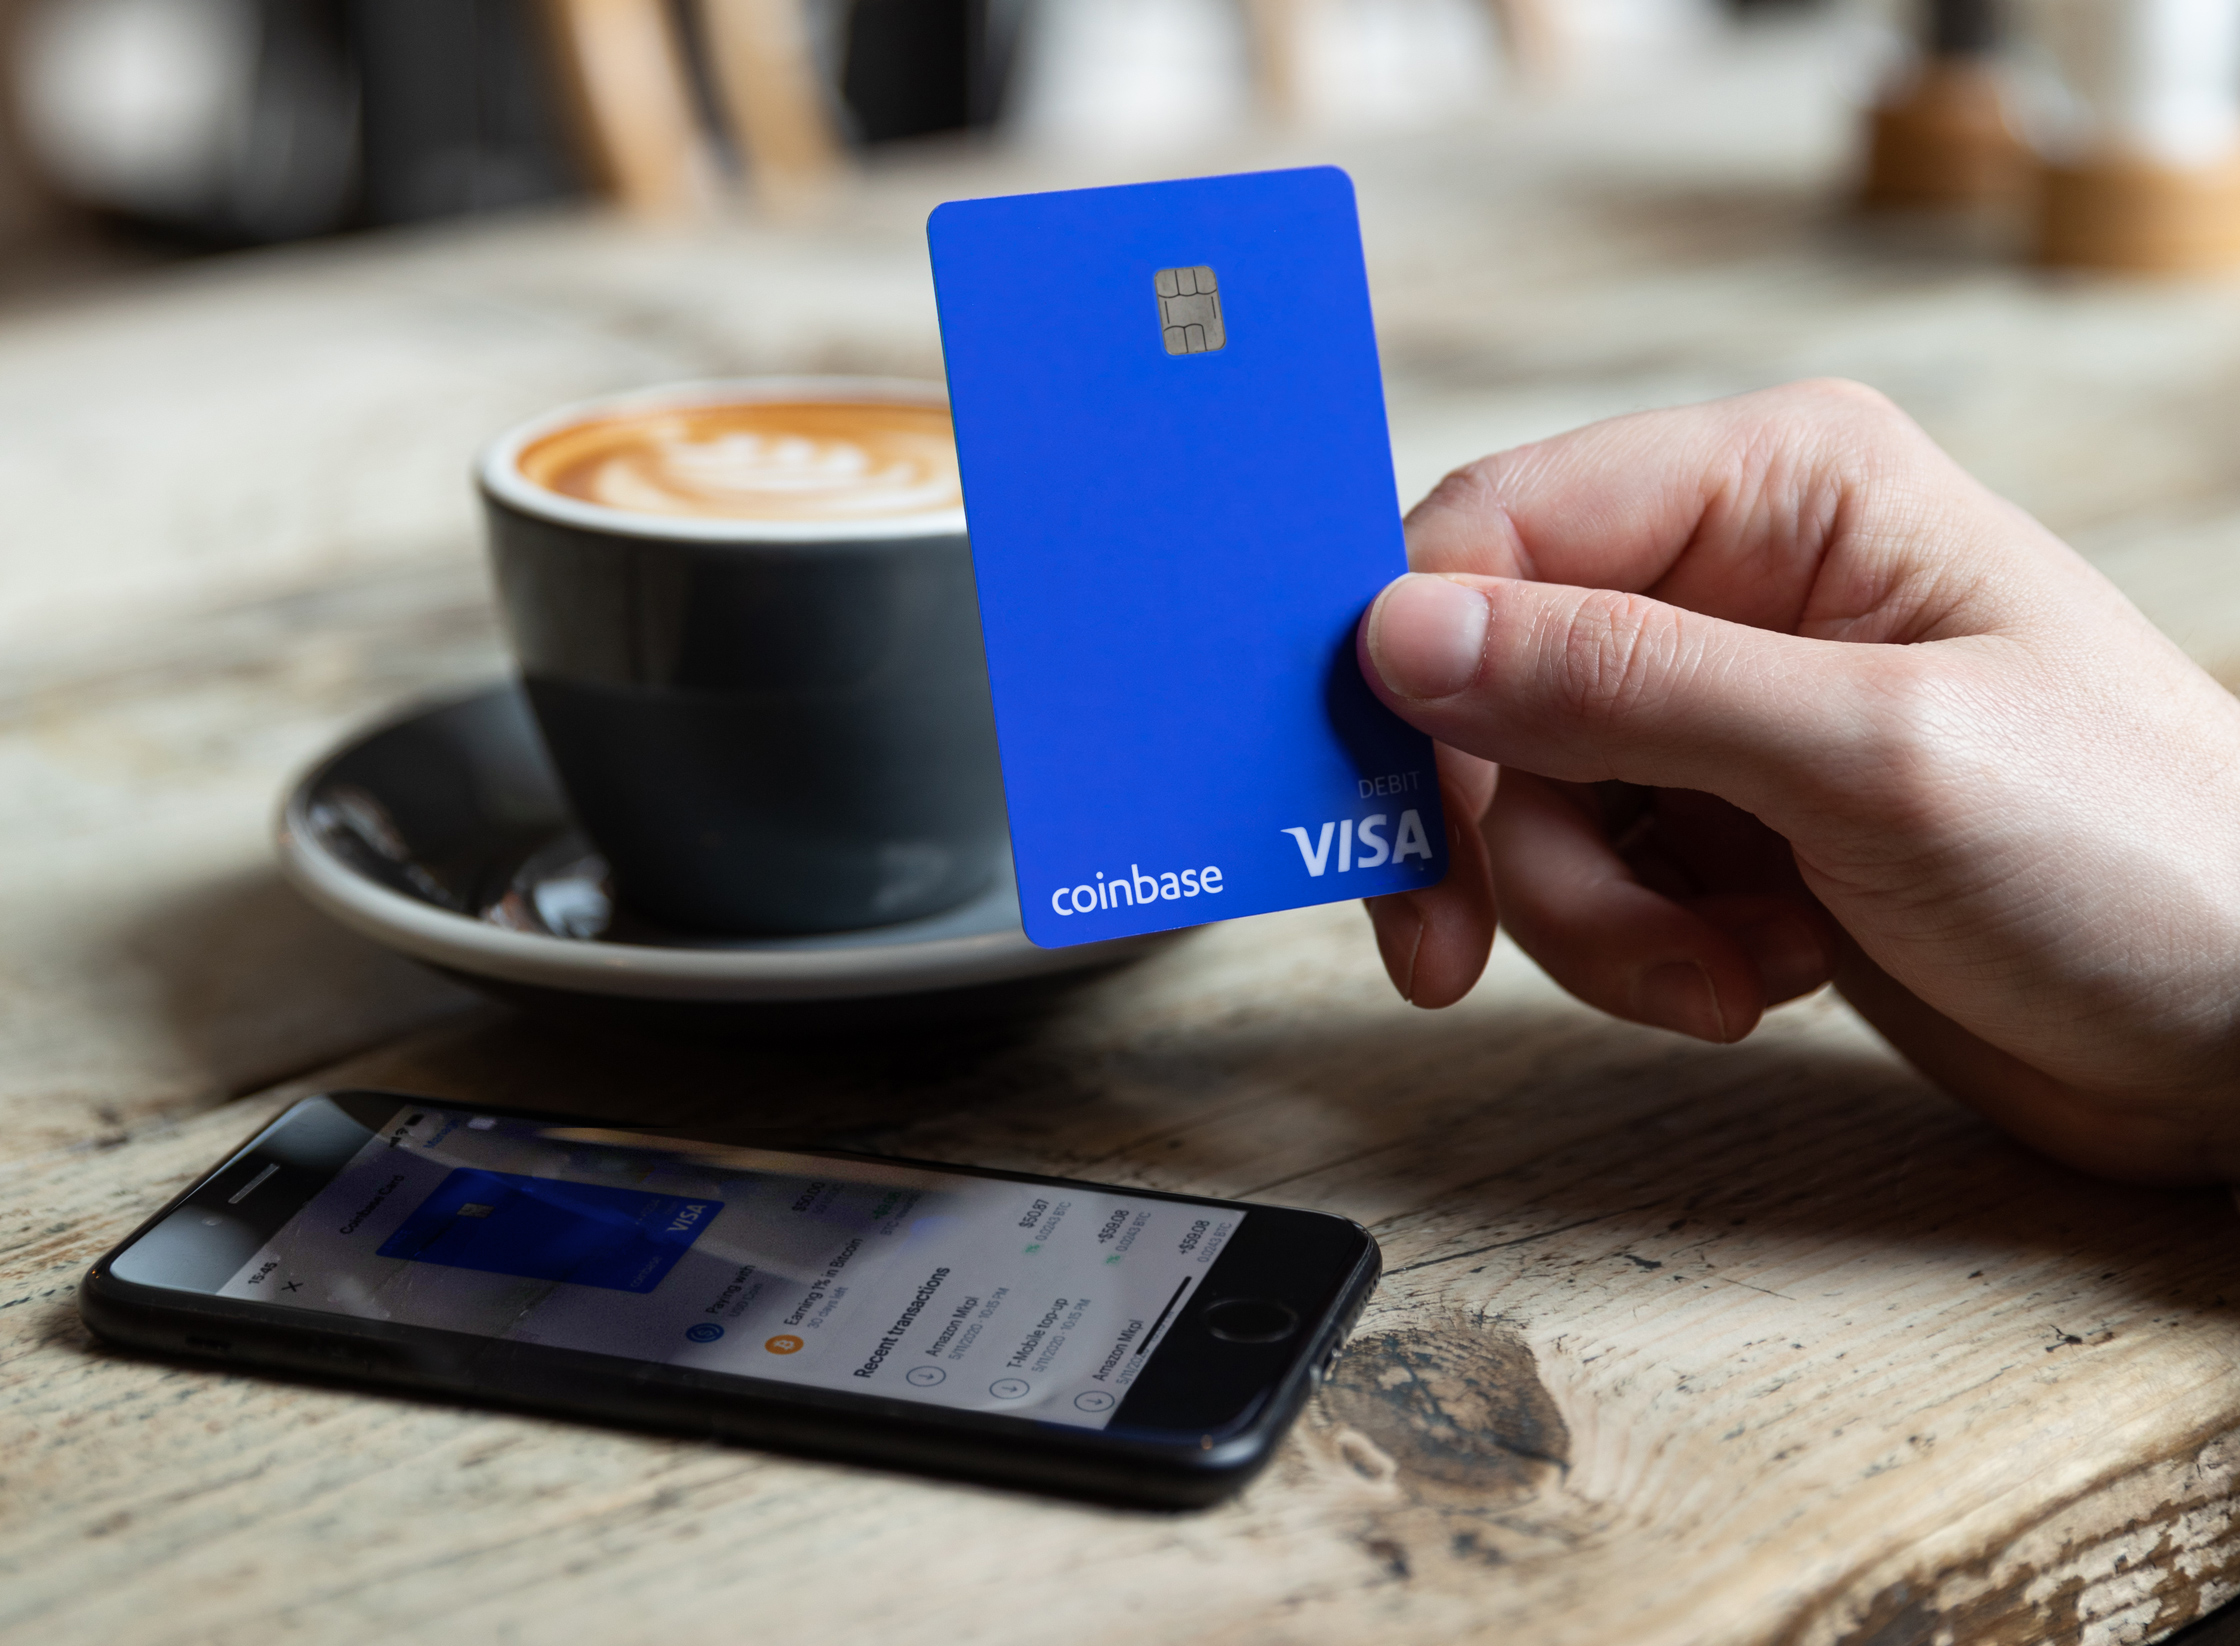 Coinbase to Launch Crypto Debit Card in US for Retail Spending - CoinDesk